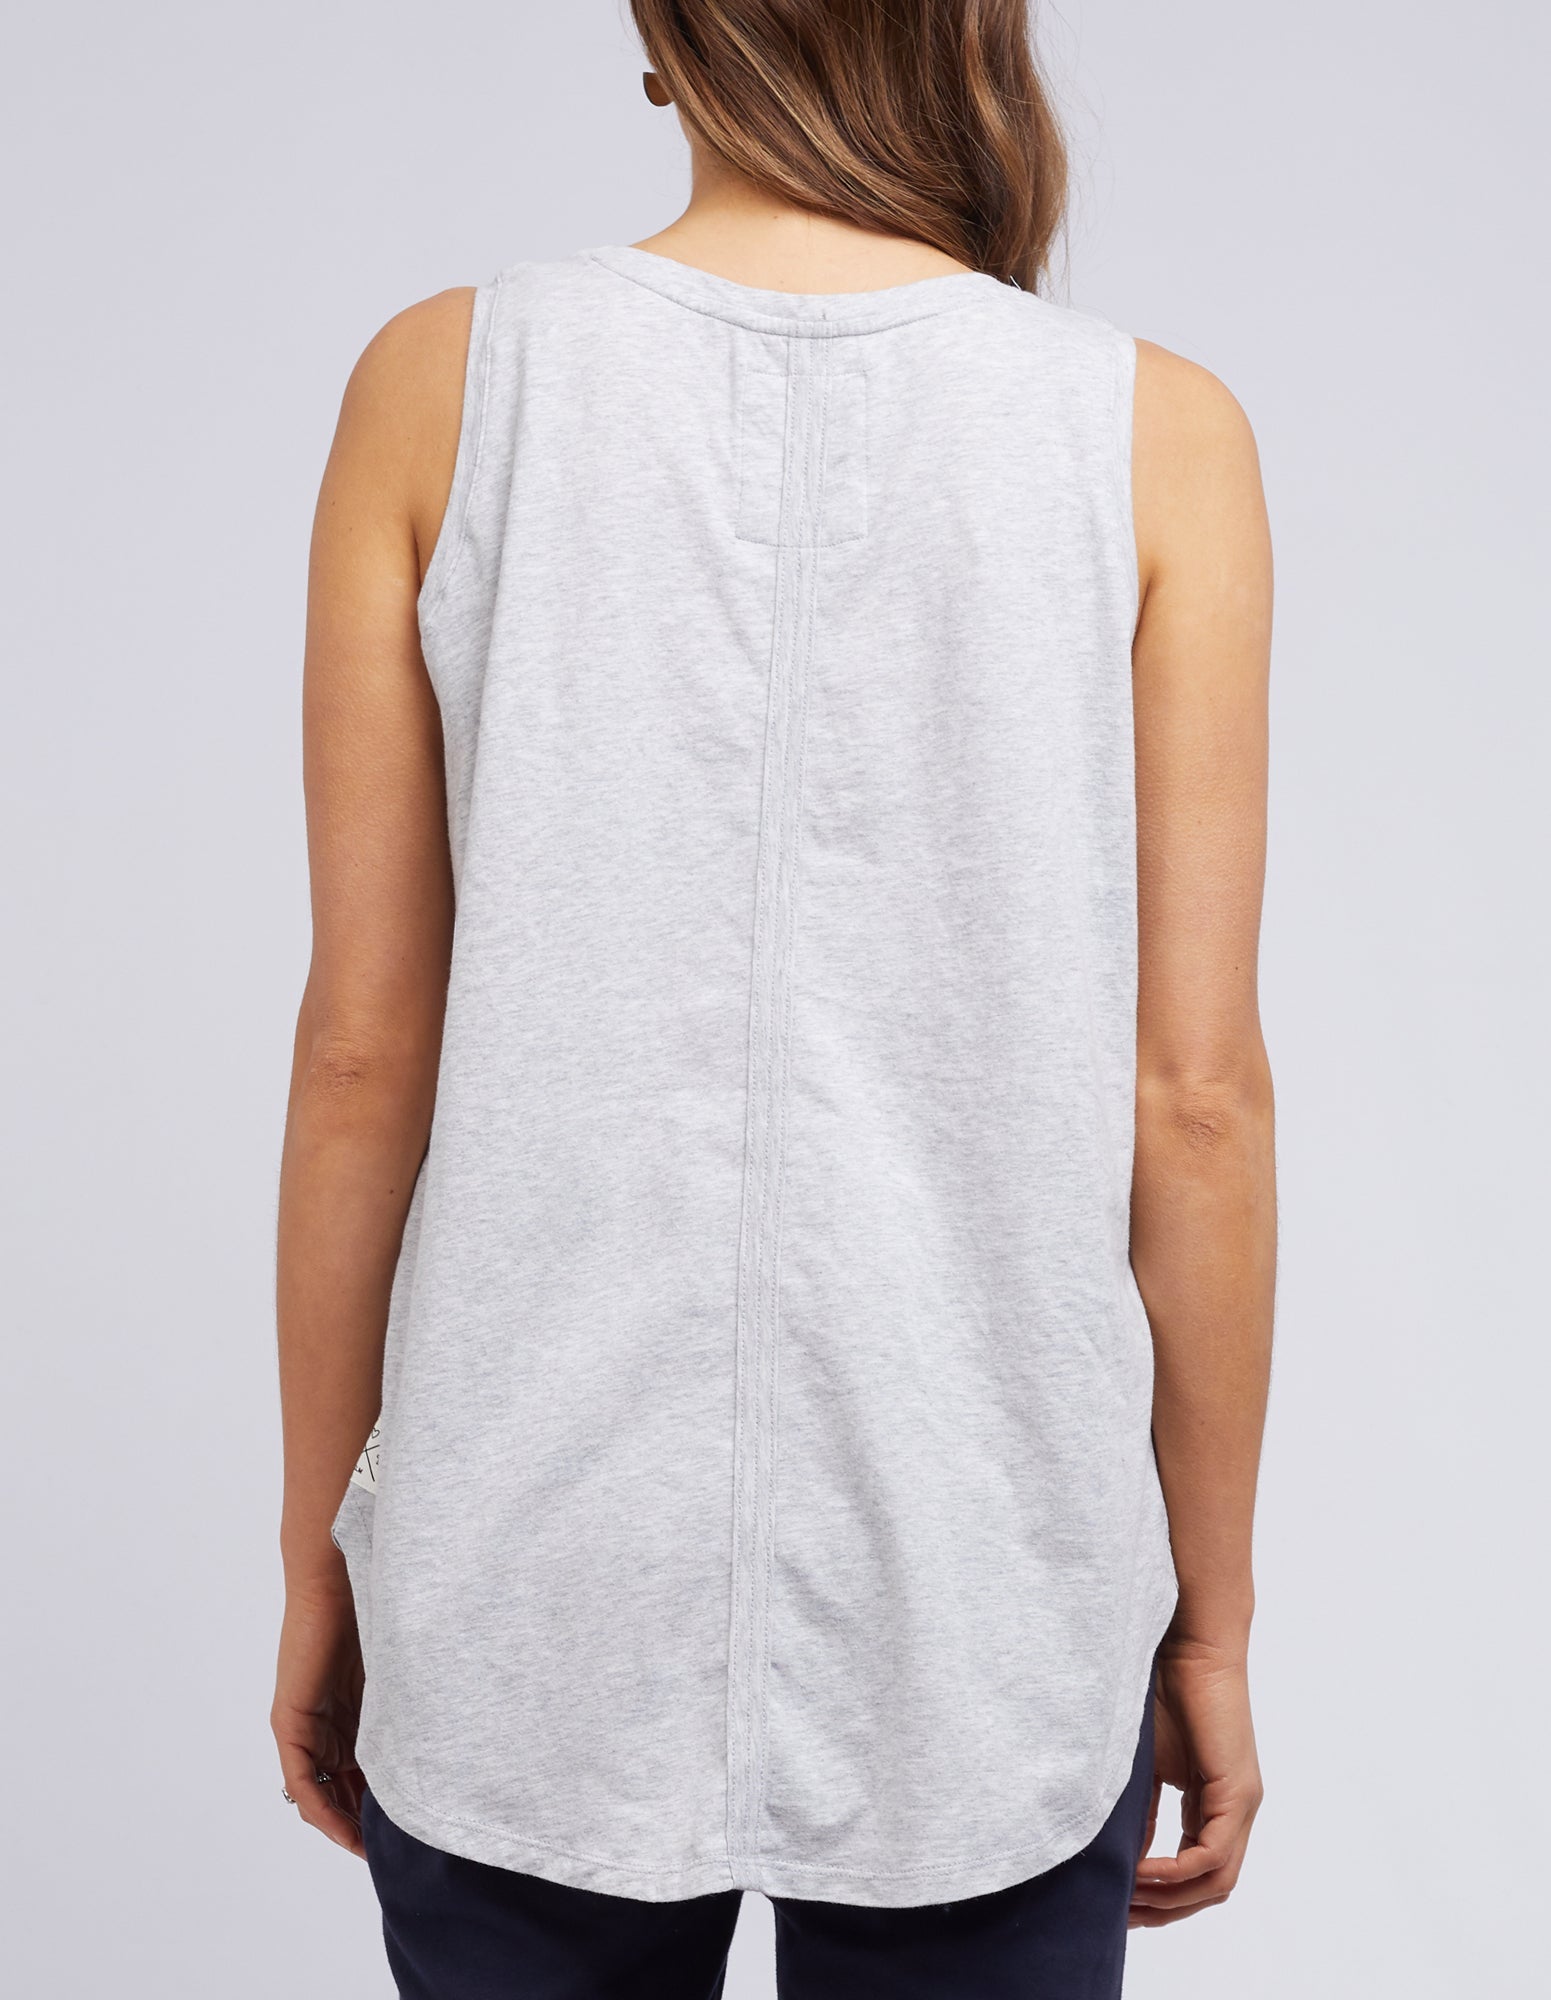 Scoop Tank - Grey Marle - Elm Lifestyle - FUDGE Gifts Home Lifestyle